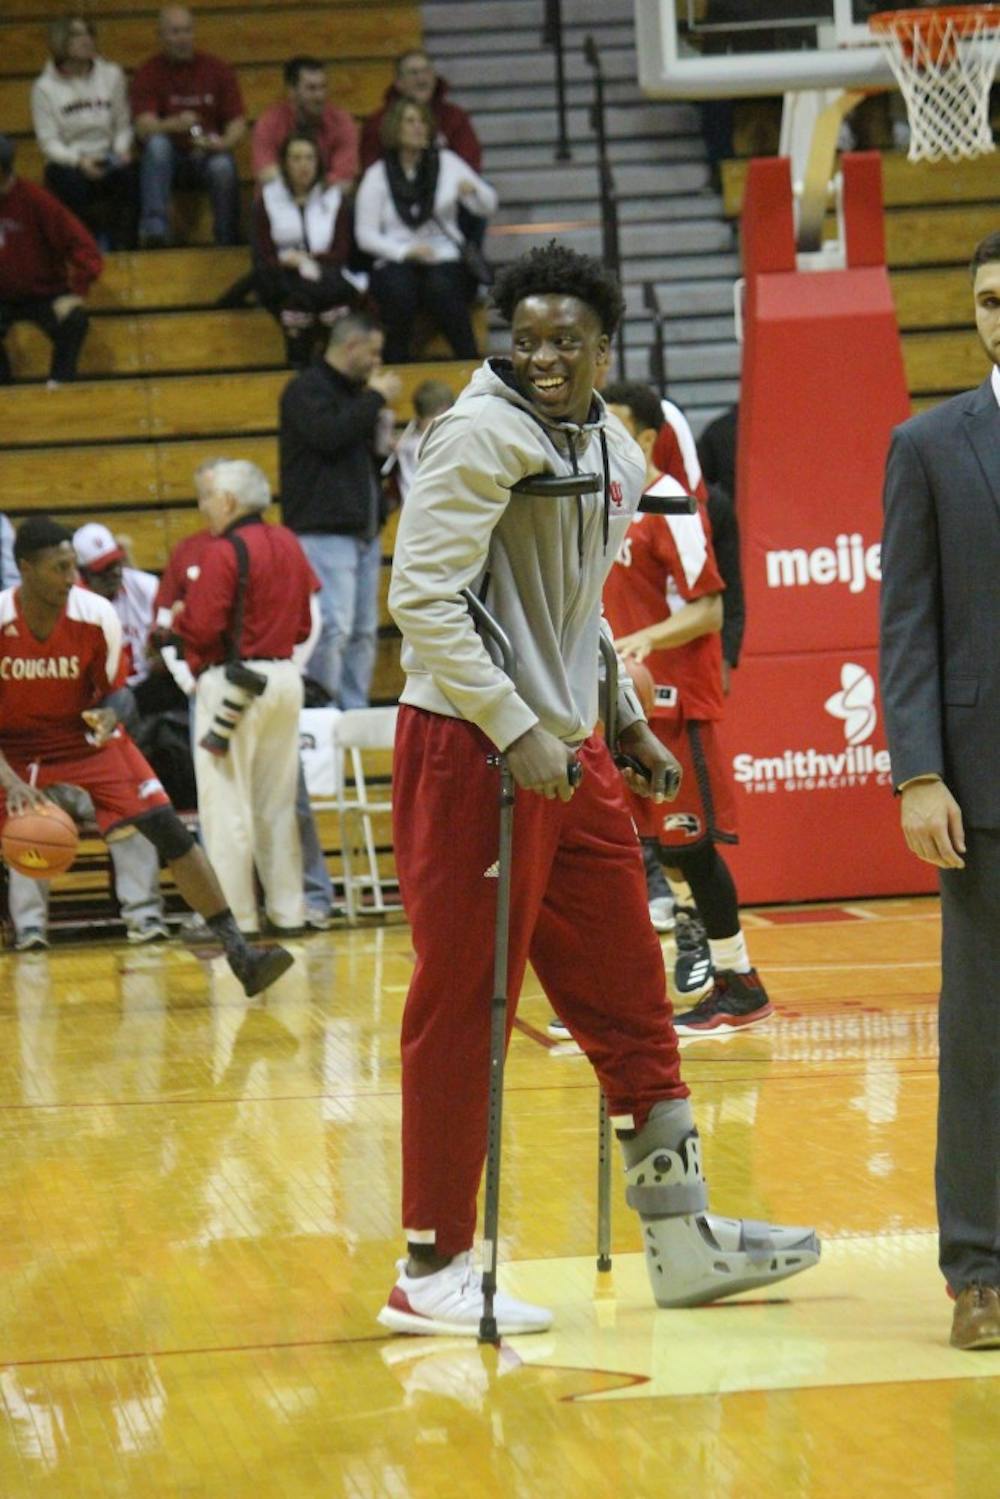 Sophomore forward OG Anunoby stands at center court&nbsp;pregame against SIU-Edwardsville. Anunoby injured his ankle in the final moments against North Carolina Wednesday and is out indefinitely with an ankle injury.